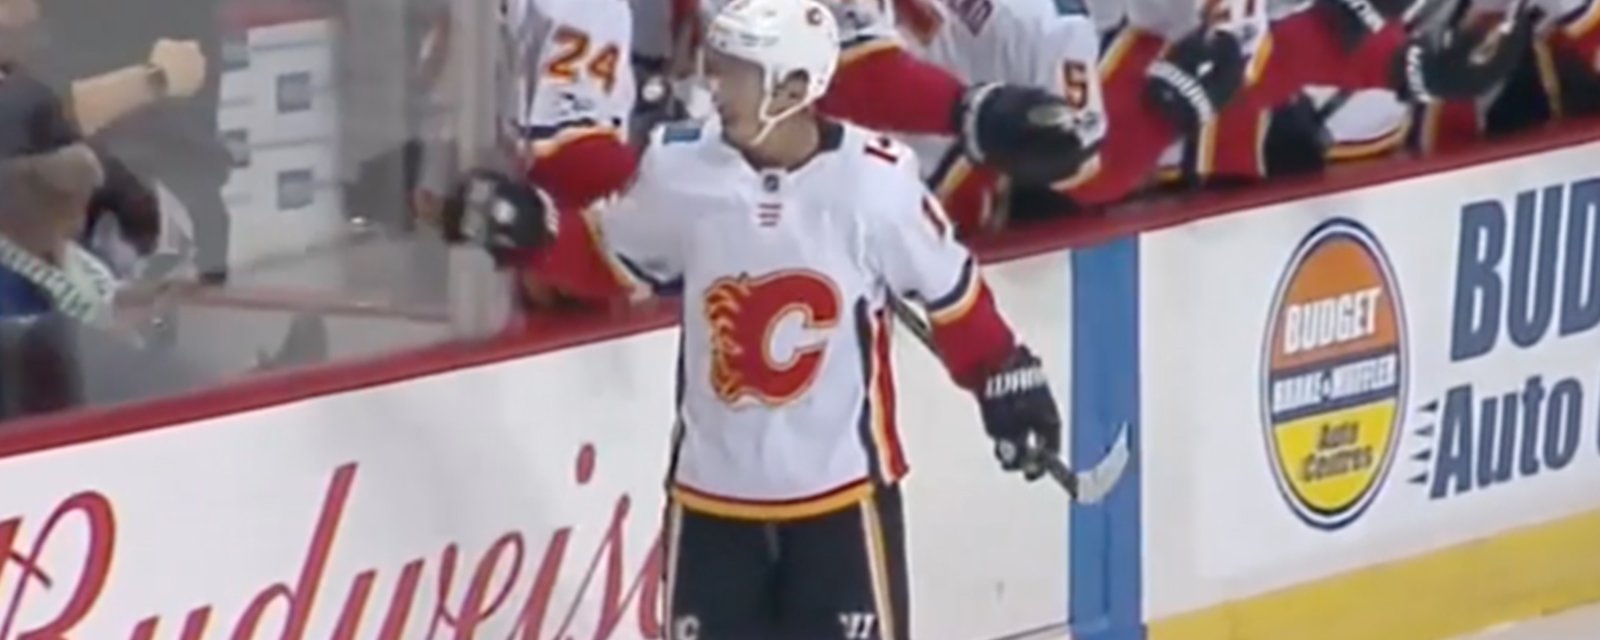 Must See: Gaudreau fist bumps fan after sniping on Canucks